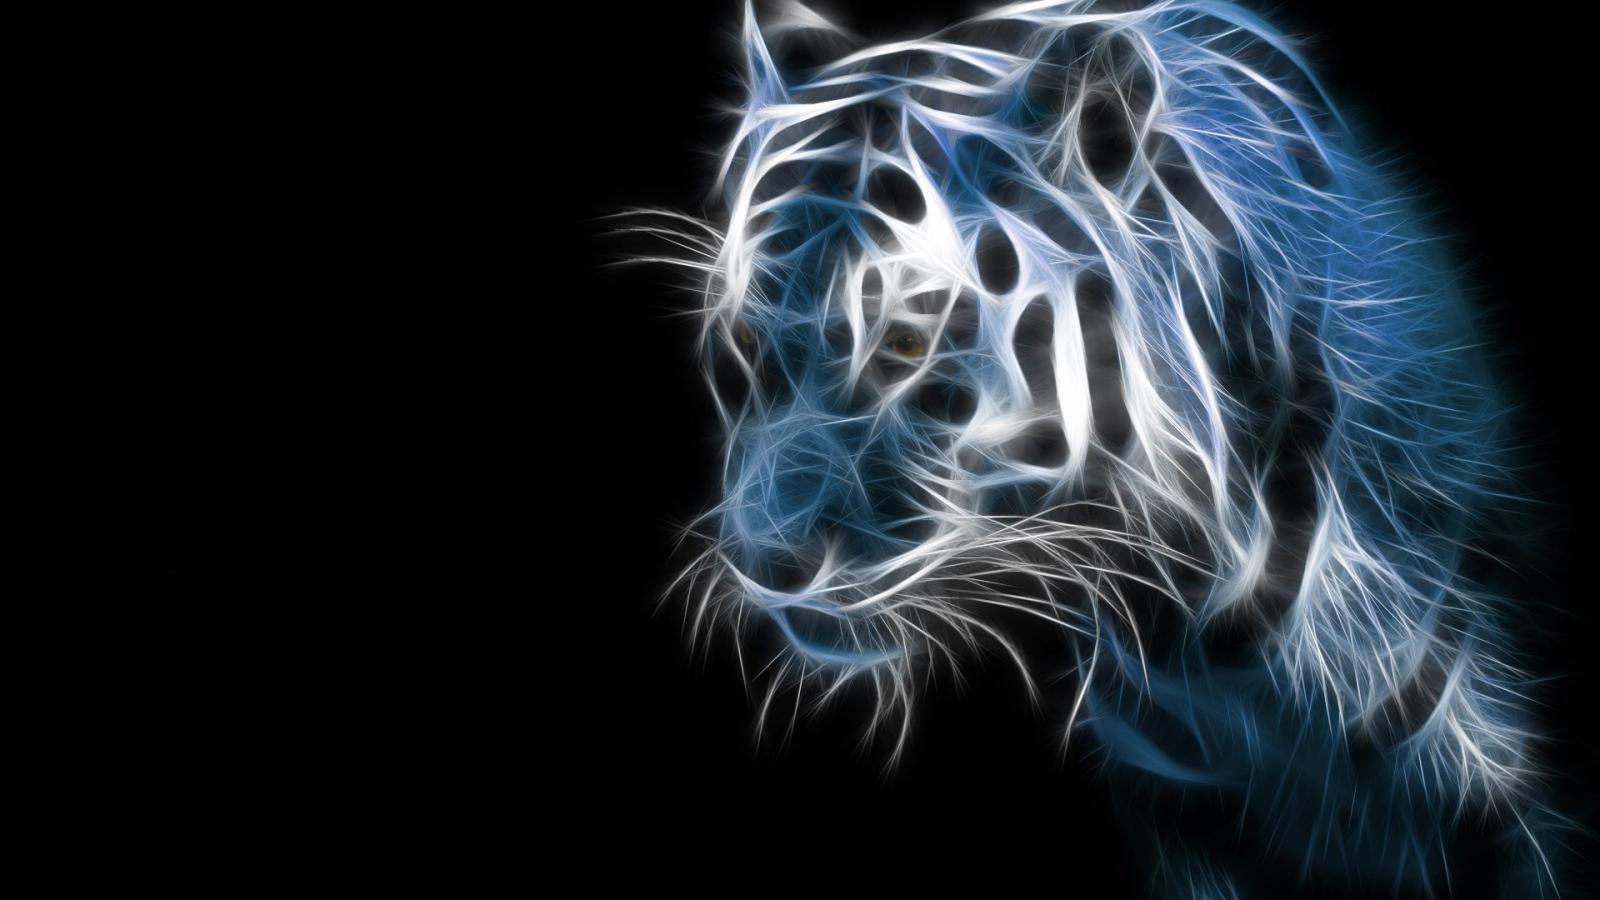 Animal 3d wallpapers hd backgrounds - (#24318) - High Quality and ...